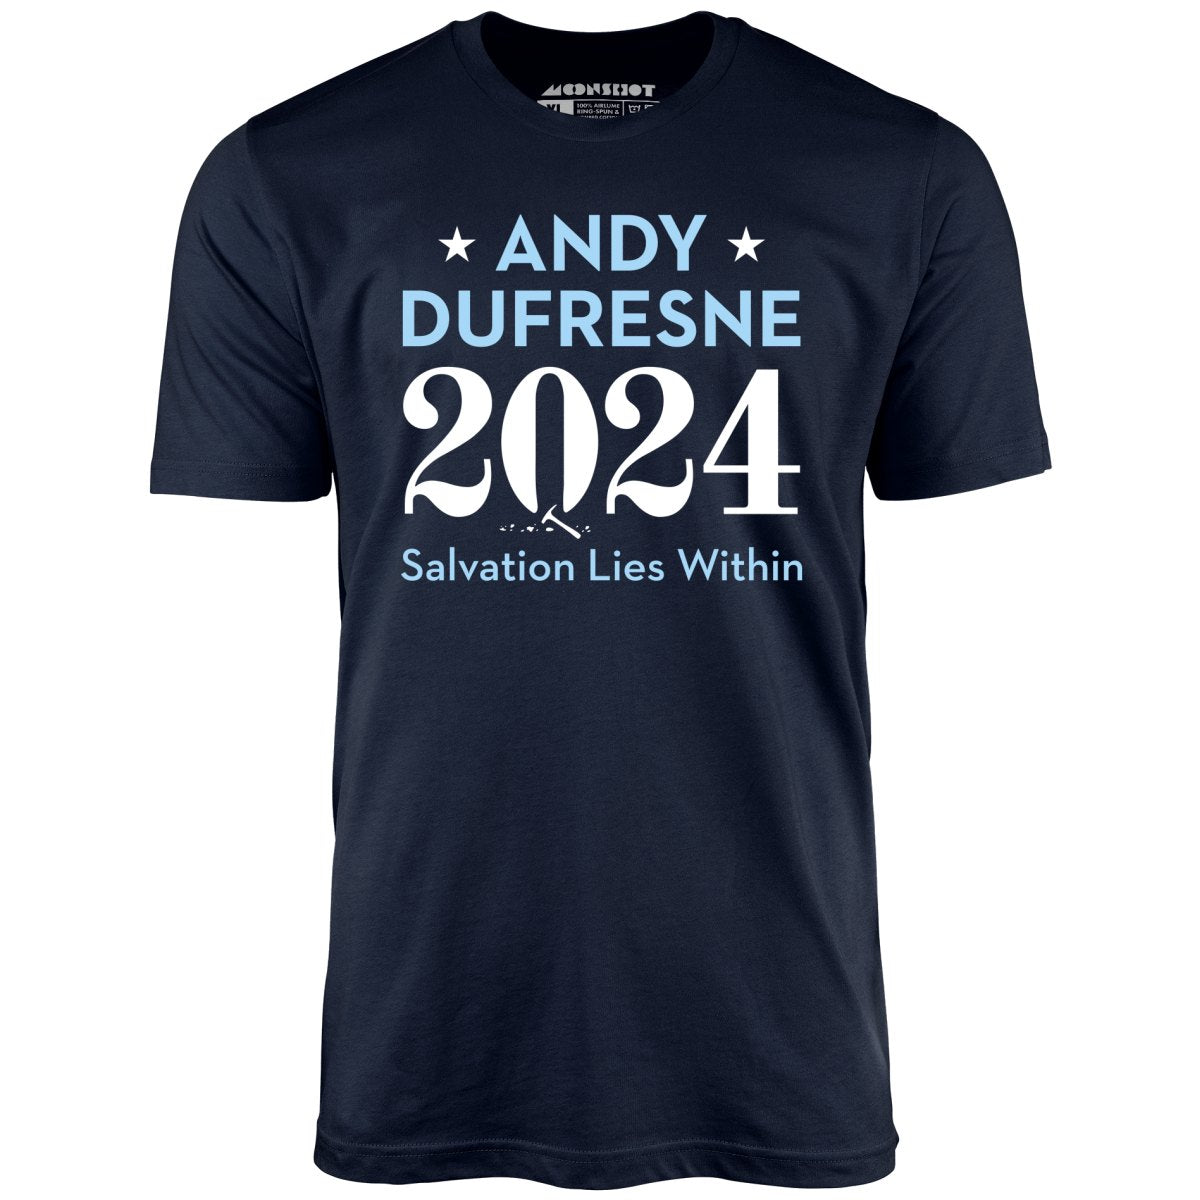 Andy Dufresne 2024 - Phony Campaign - Unisex T-Shirt